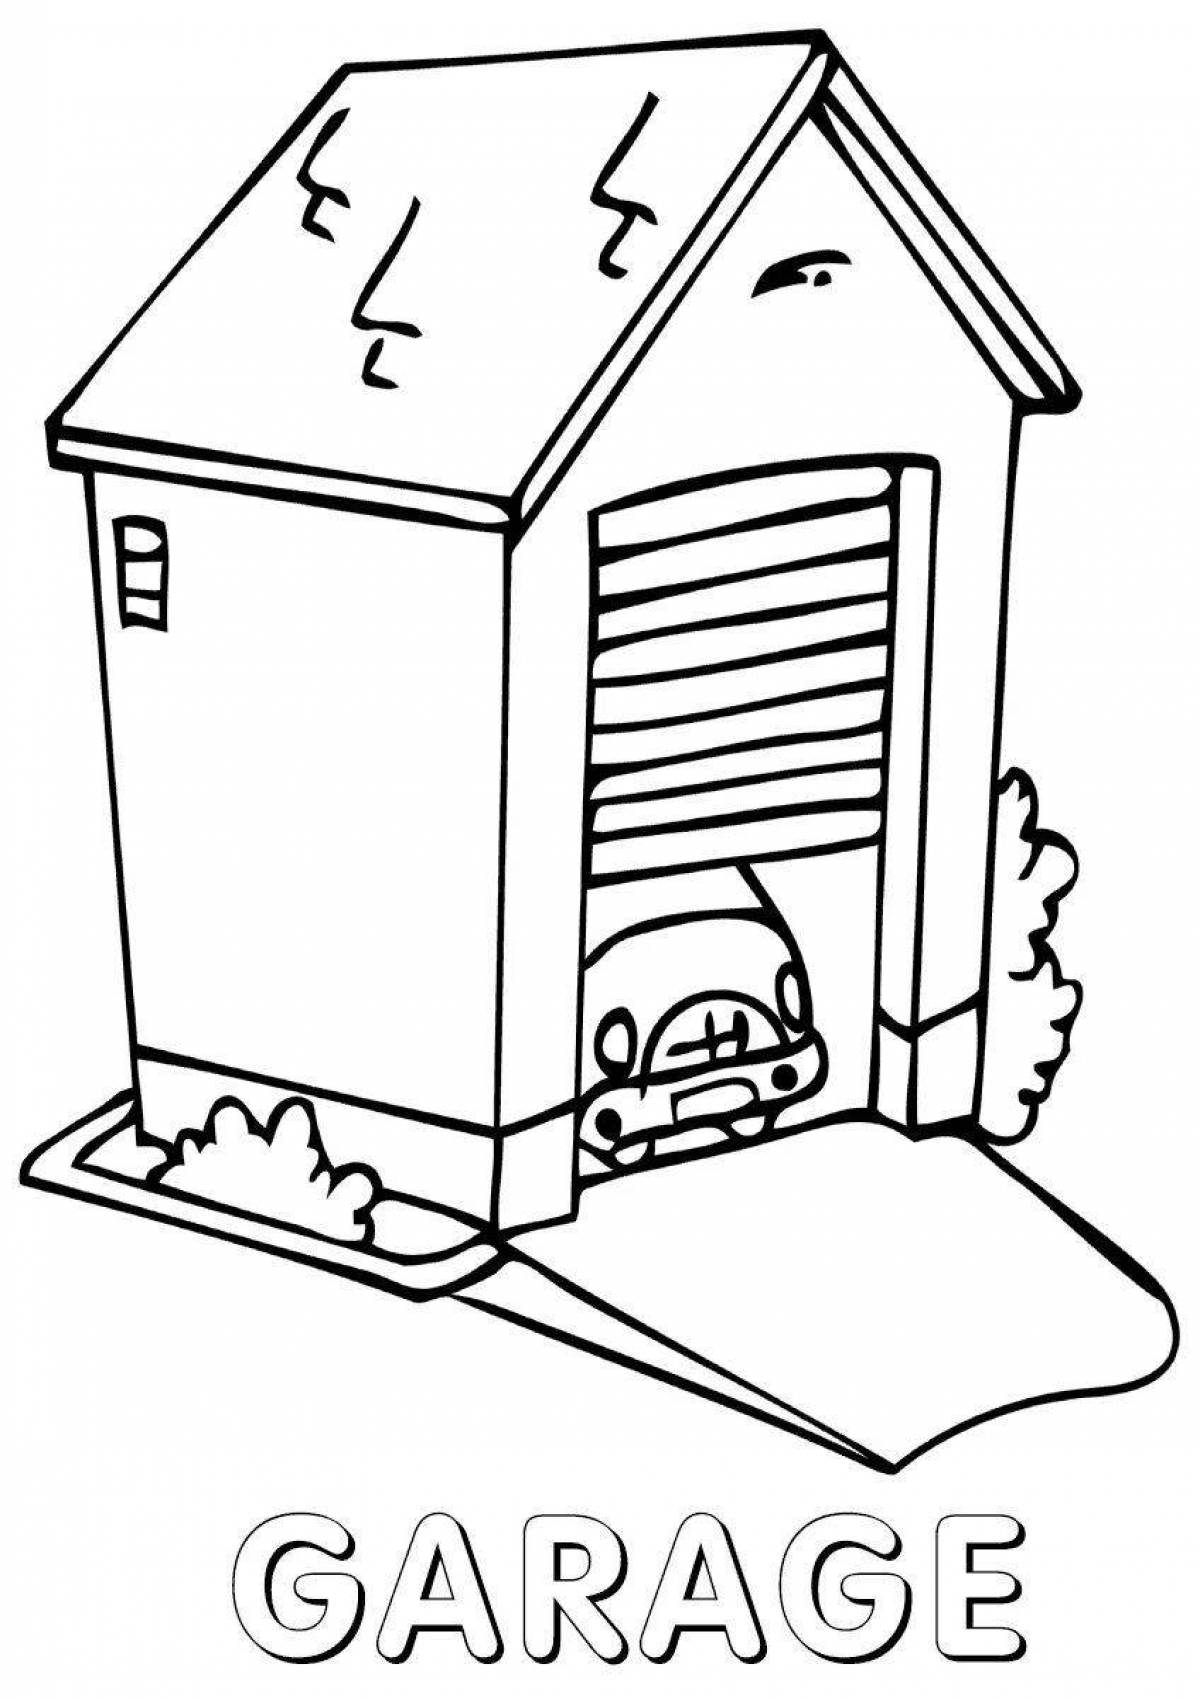 Cute garage coloring page